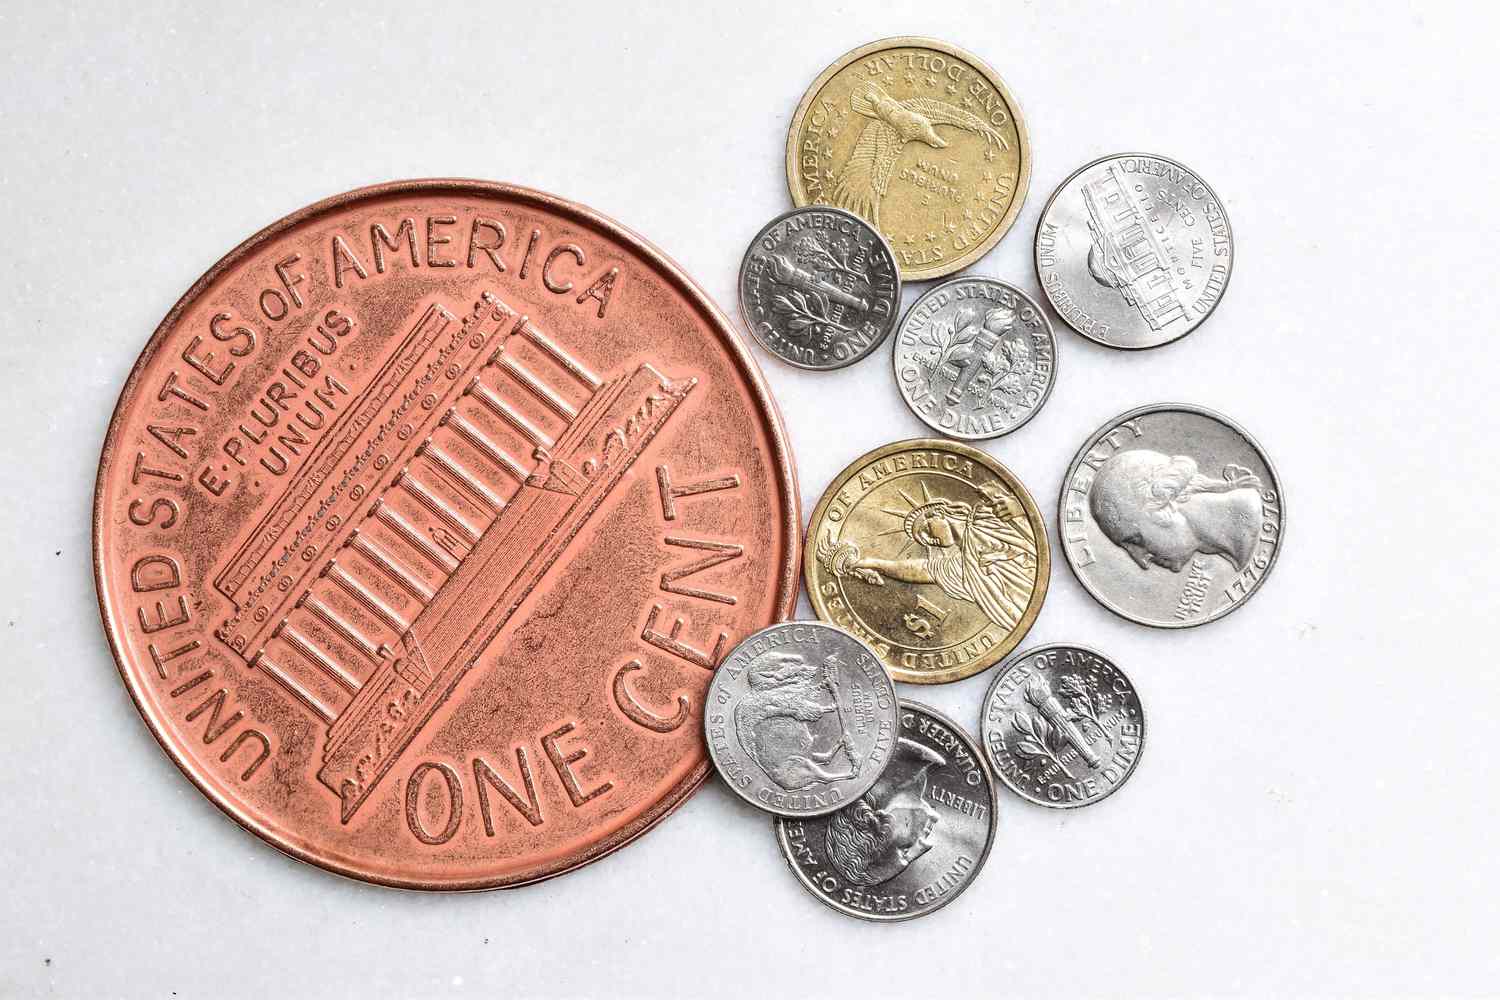 Coins of the United States dollar - Wikipedia